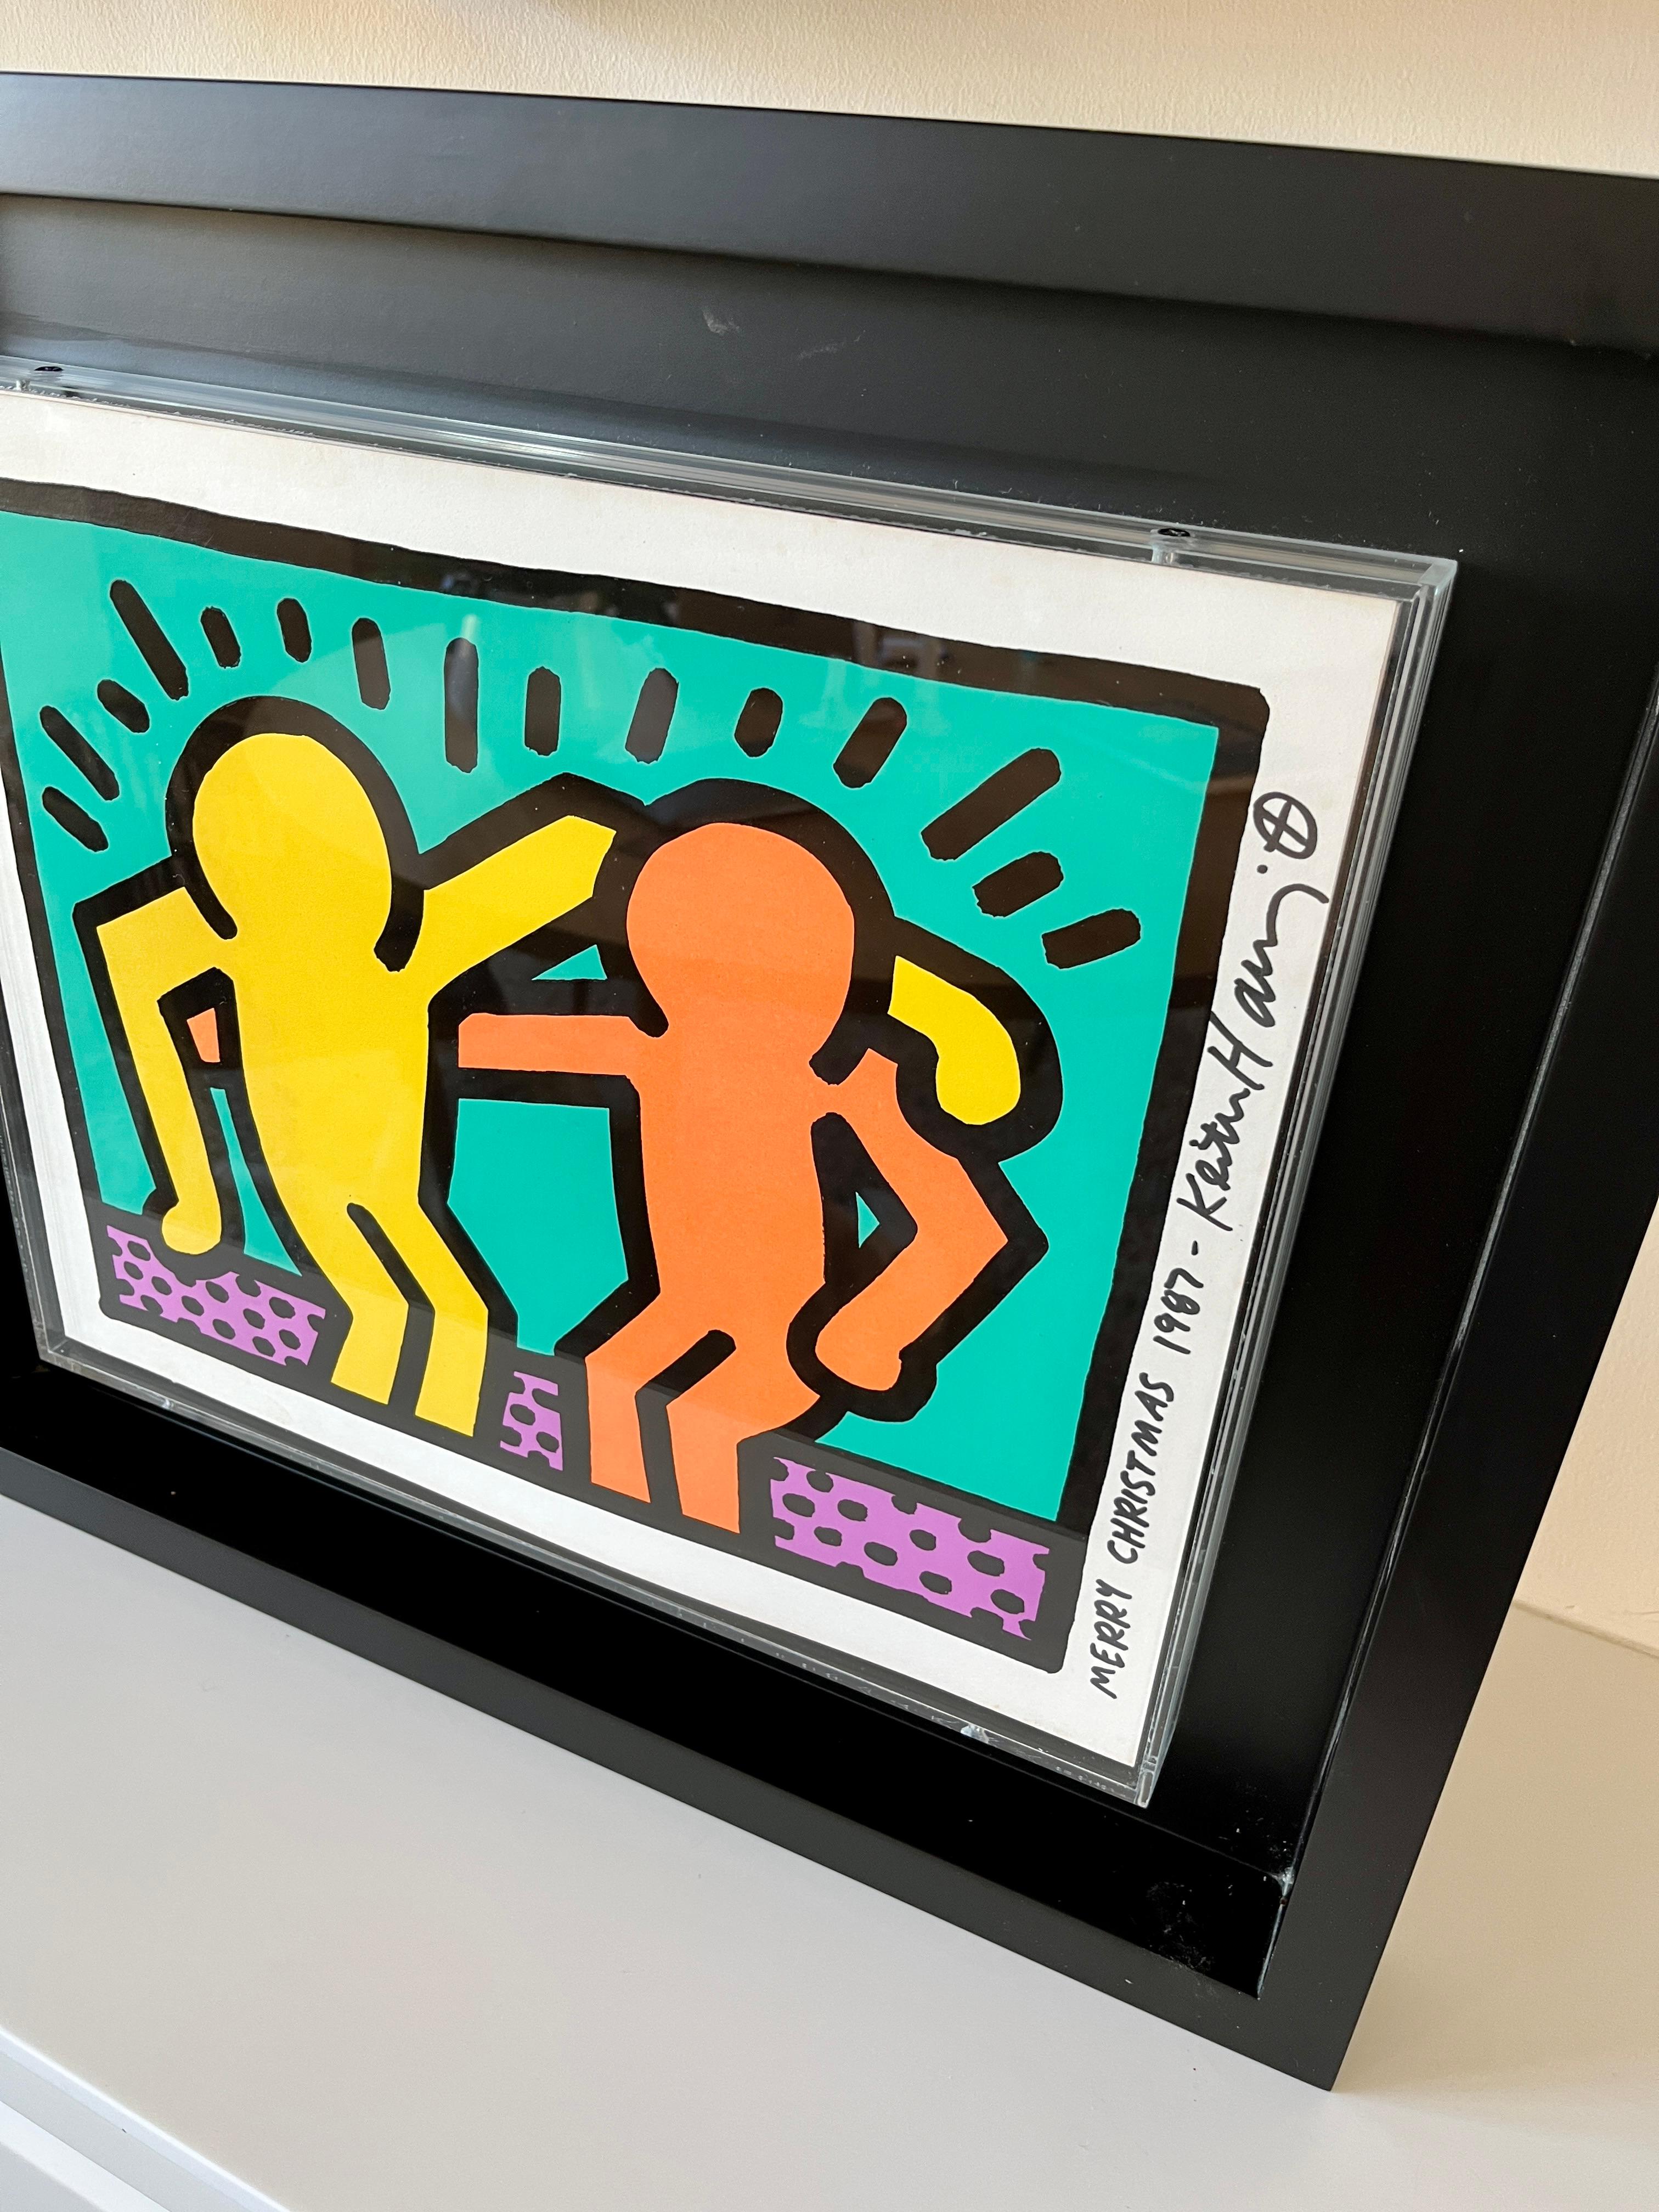 Best Buddies - Pops Shop 1. Plate 1. - Print by Keith Haring